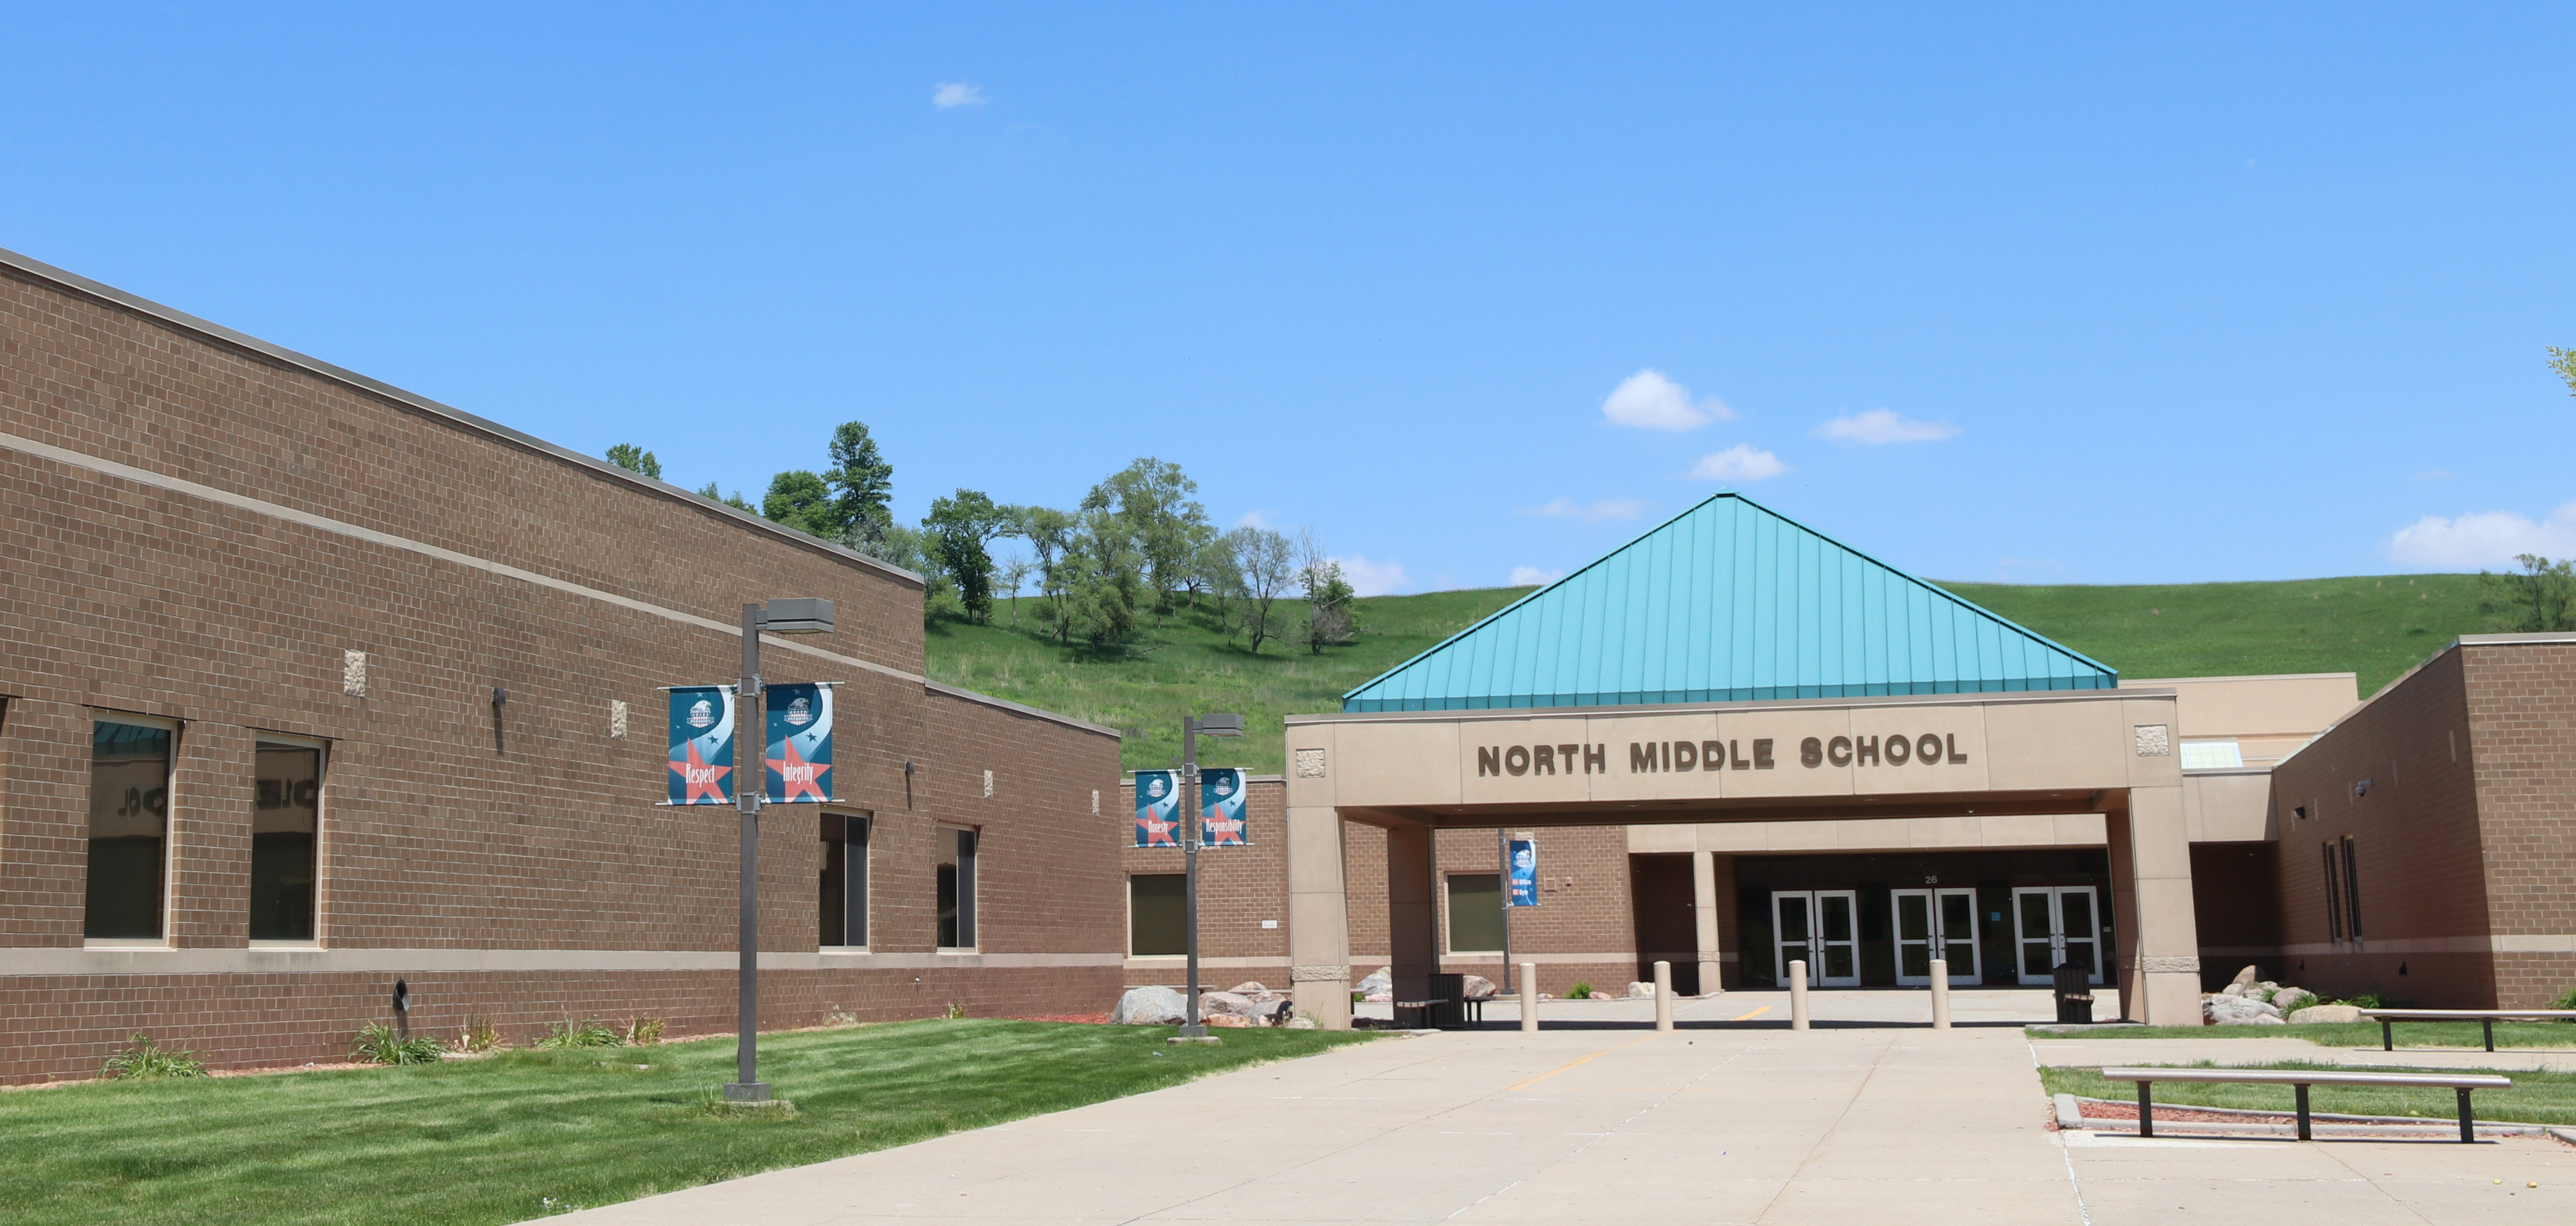 Exterior of North Middle school building